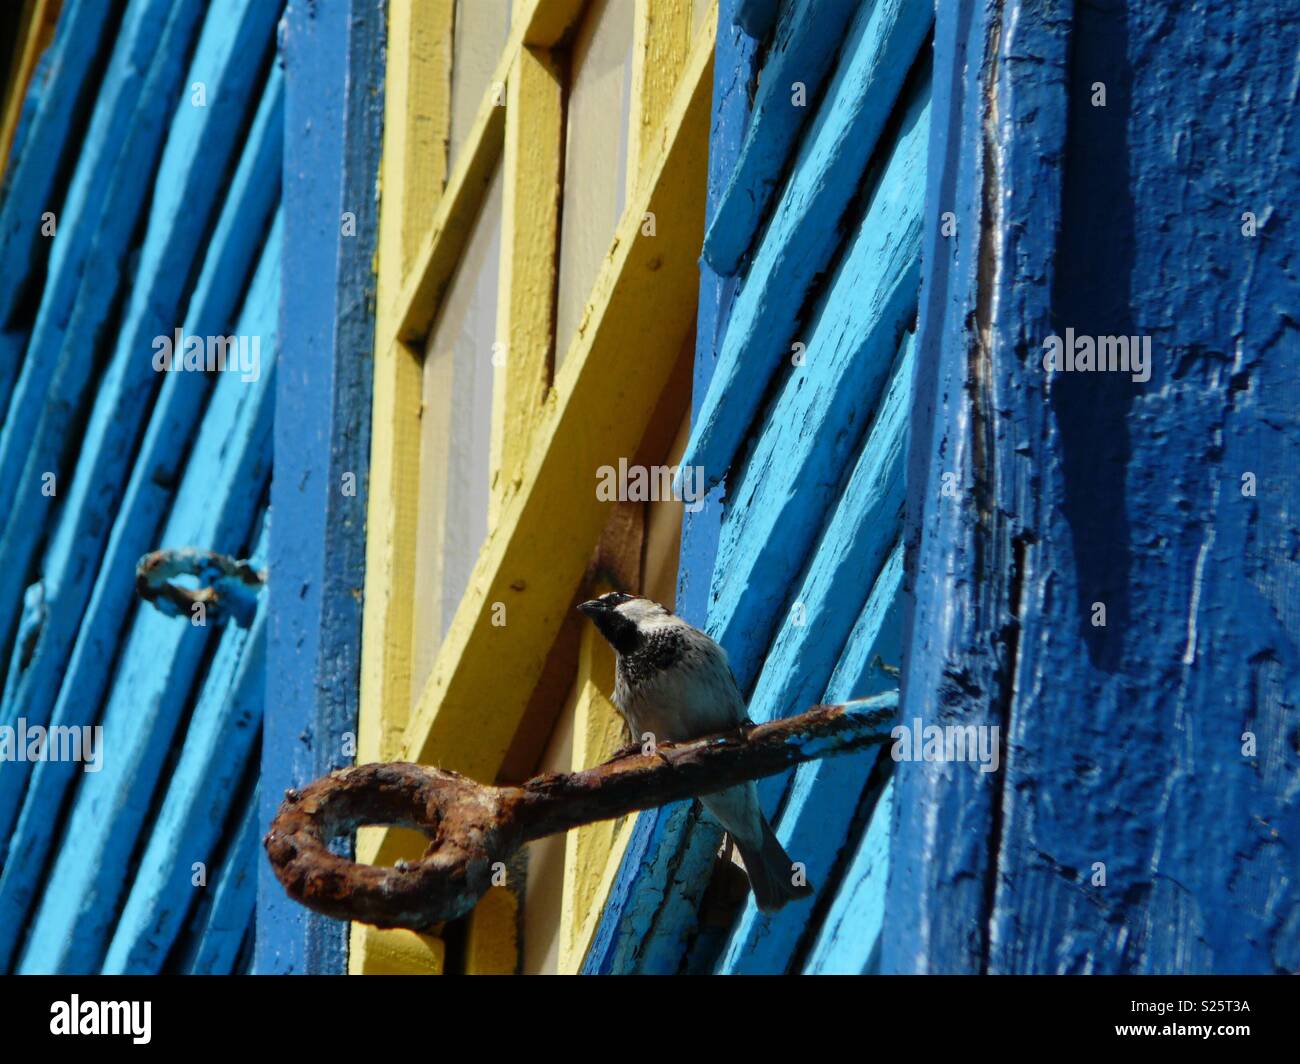 Sparrow against old brightly painted windows Stock Photo